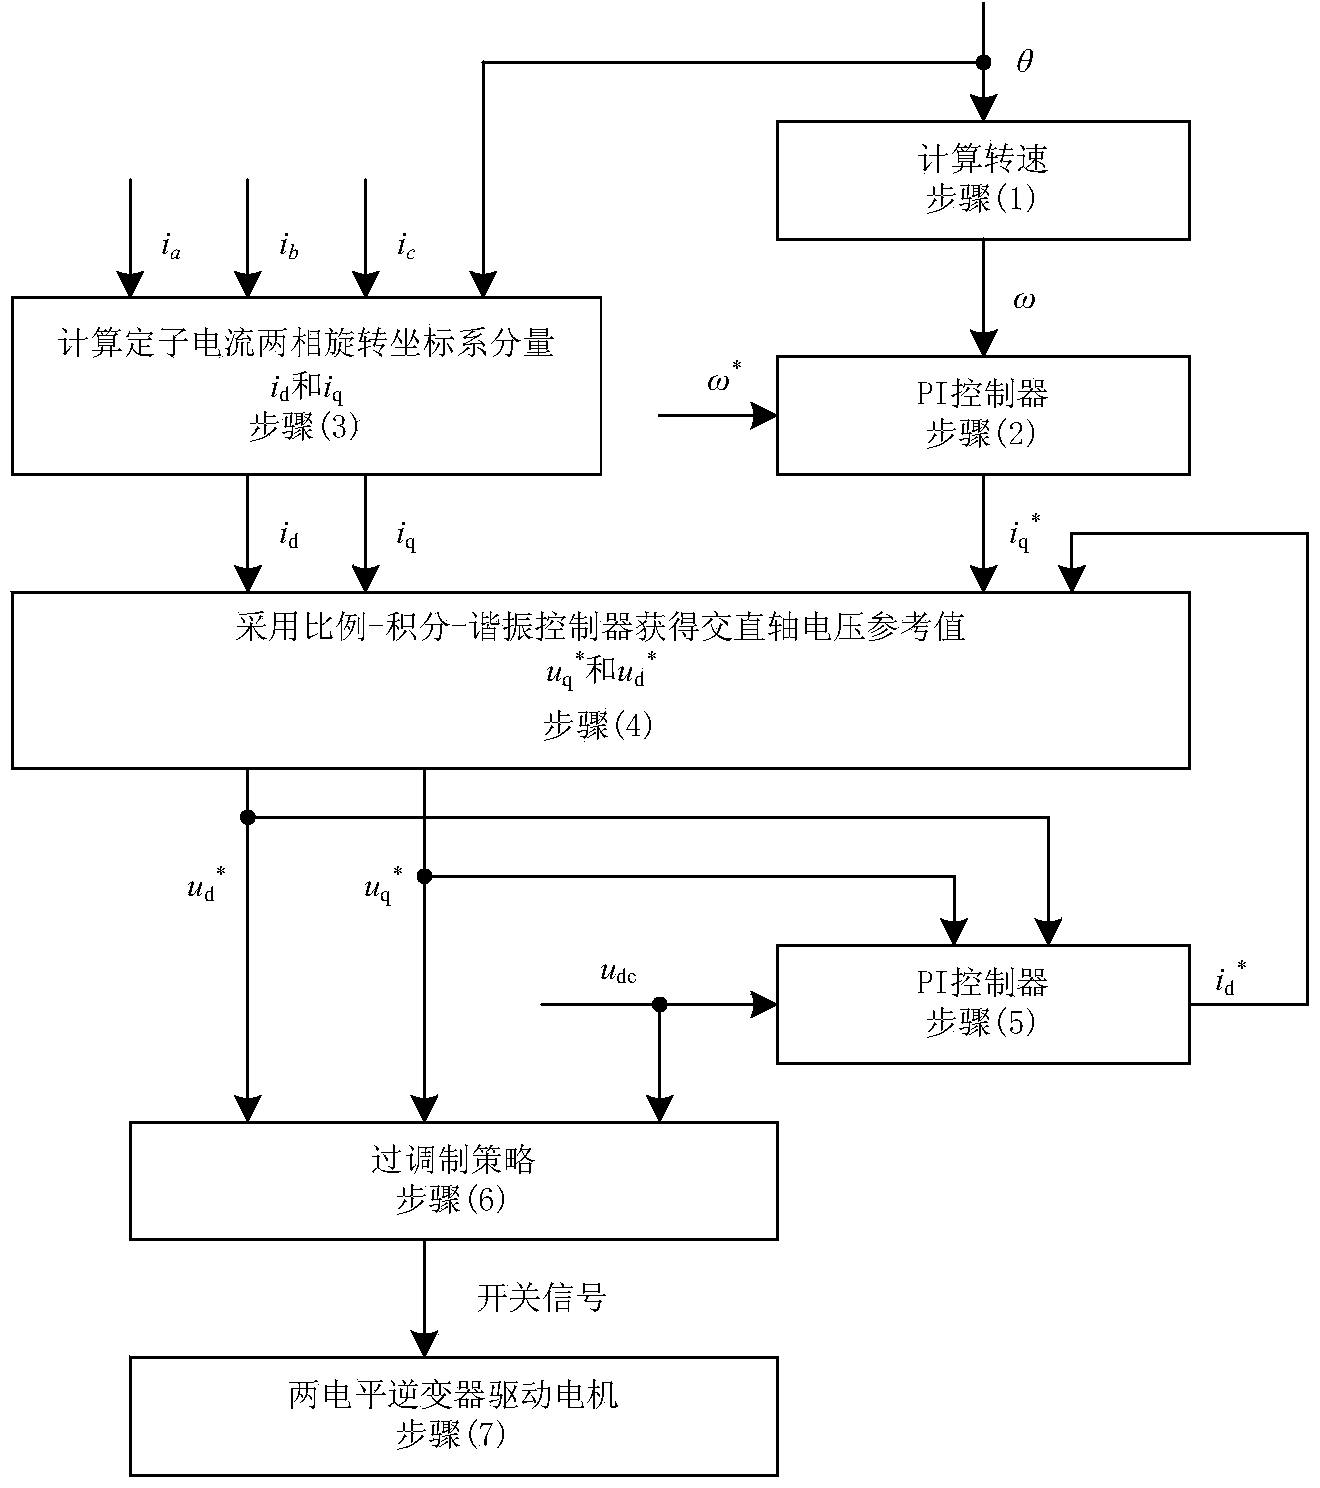 Current control method for improving output torque of permanent magnet synchronous motor overmodulation area